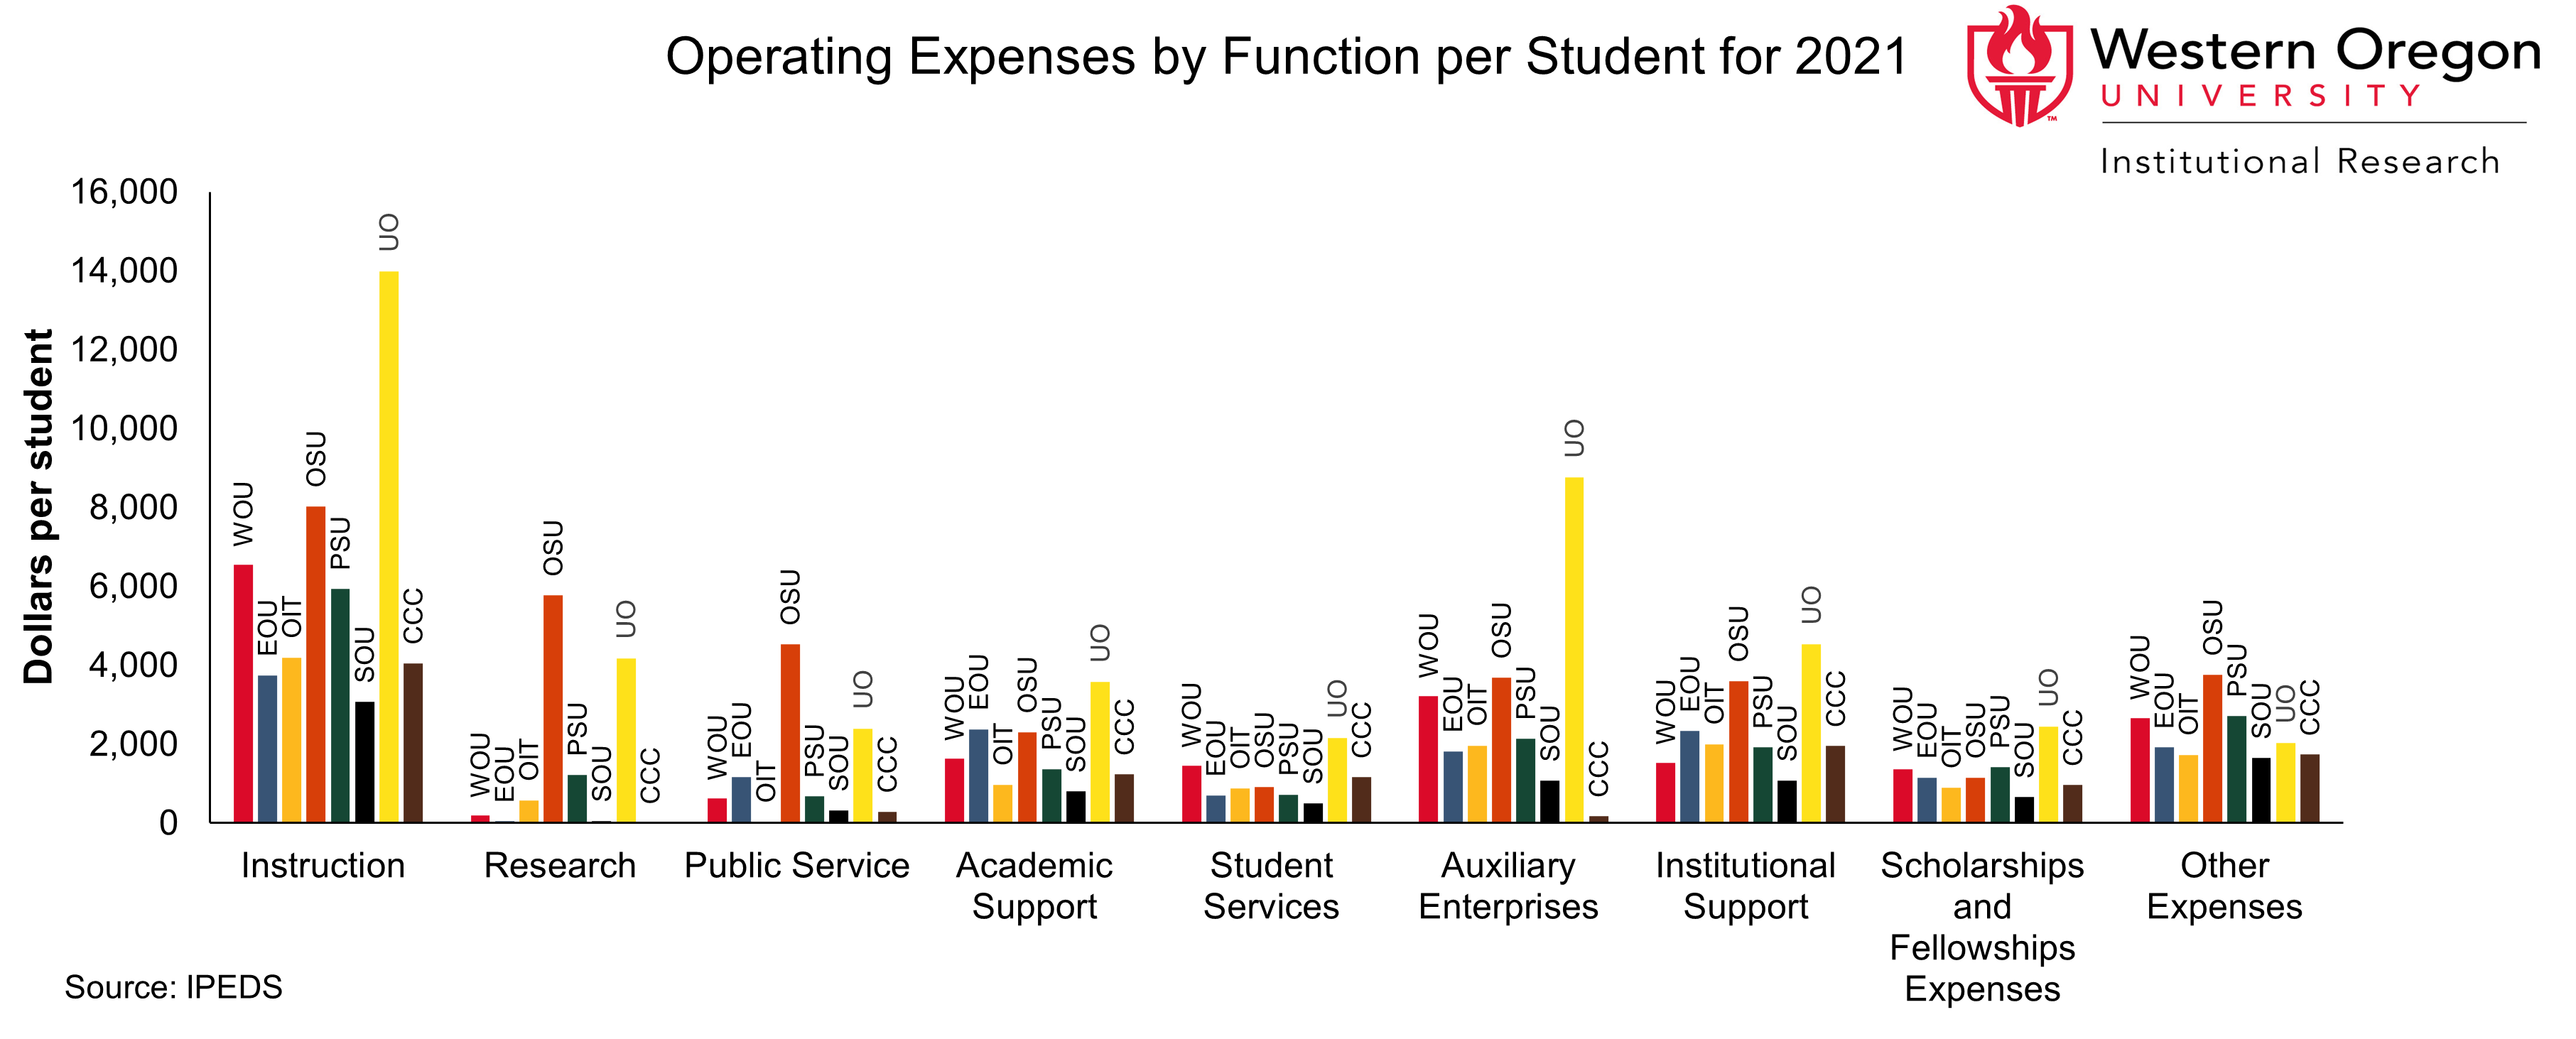 Bar graph of operating expenses per student at WOU and other Oregon Public Universities in 2021, broken out by institution and function